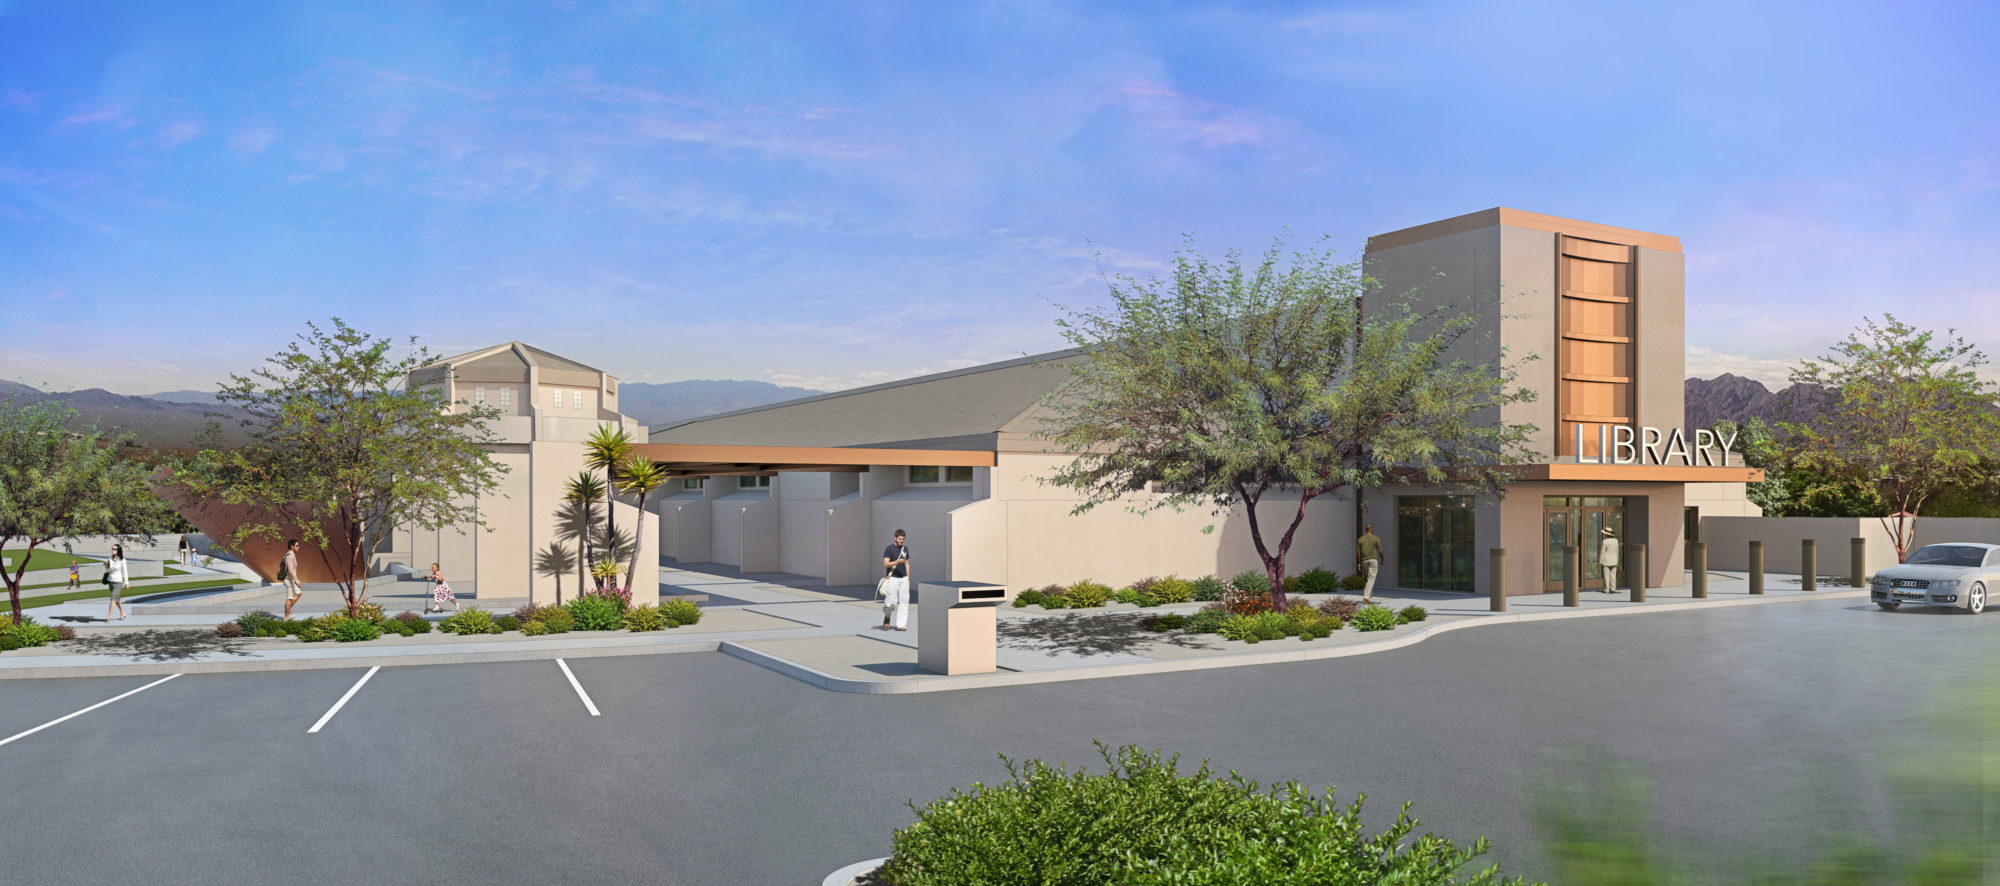 A rendering of the front Boulder City Library renovations designed by LGA Architecture.